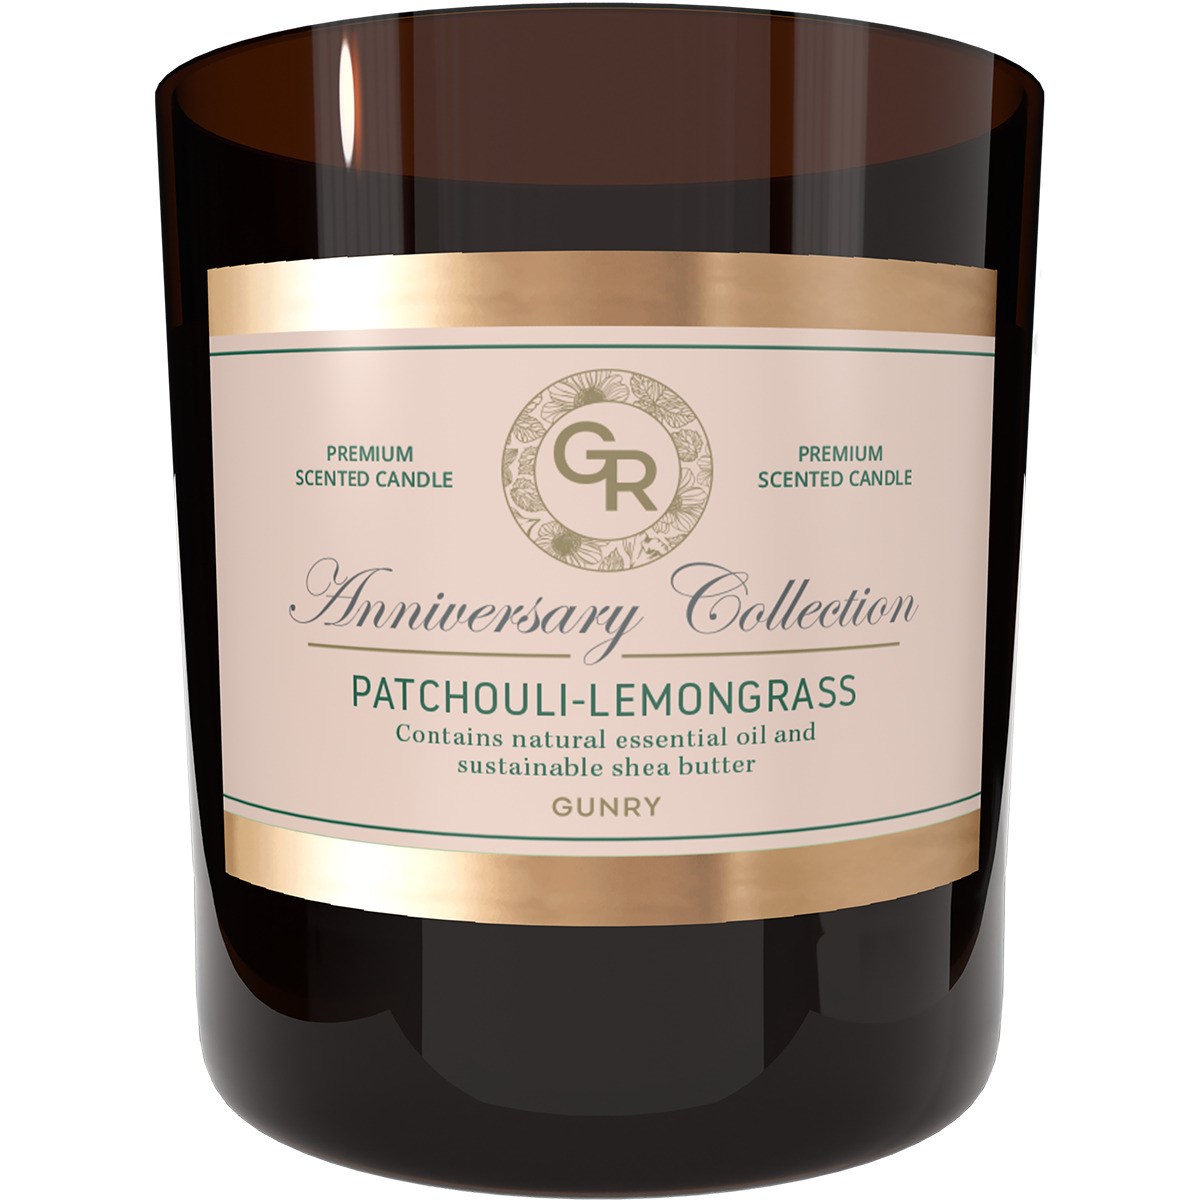 Gunry Patchouli Lemongrass Anniversary Collection Scented Candle